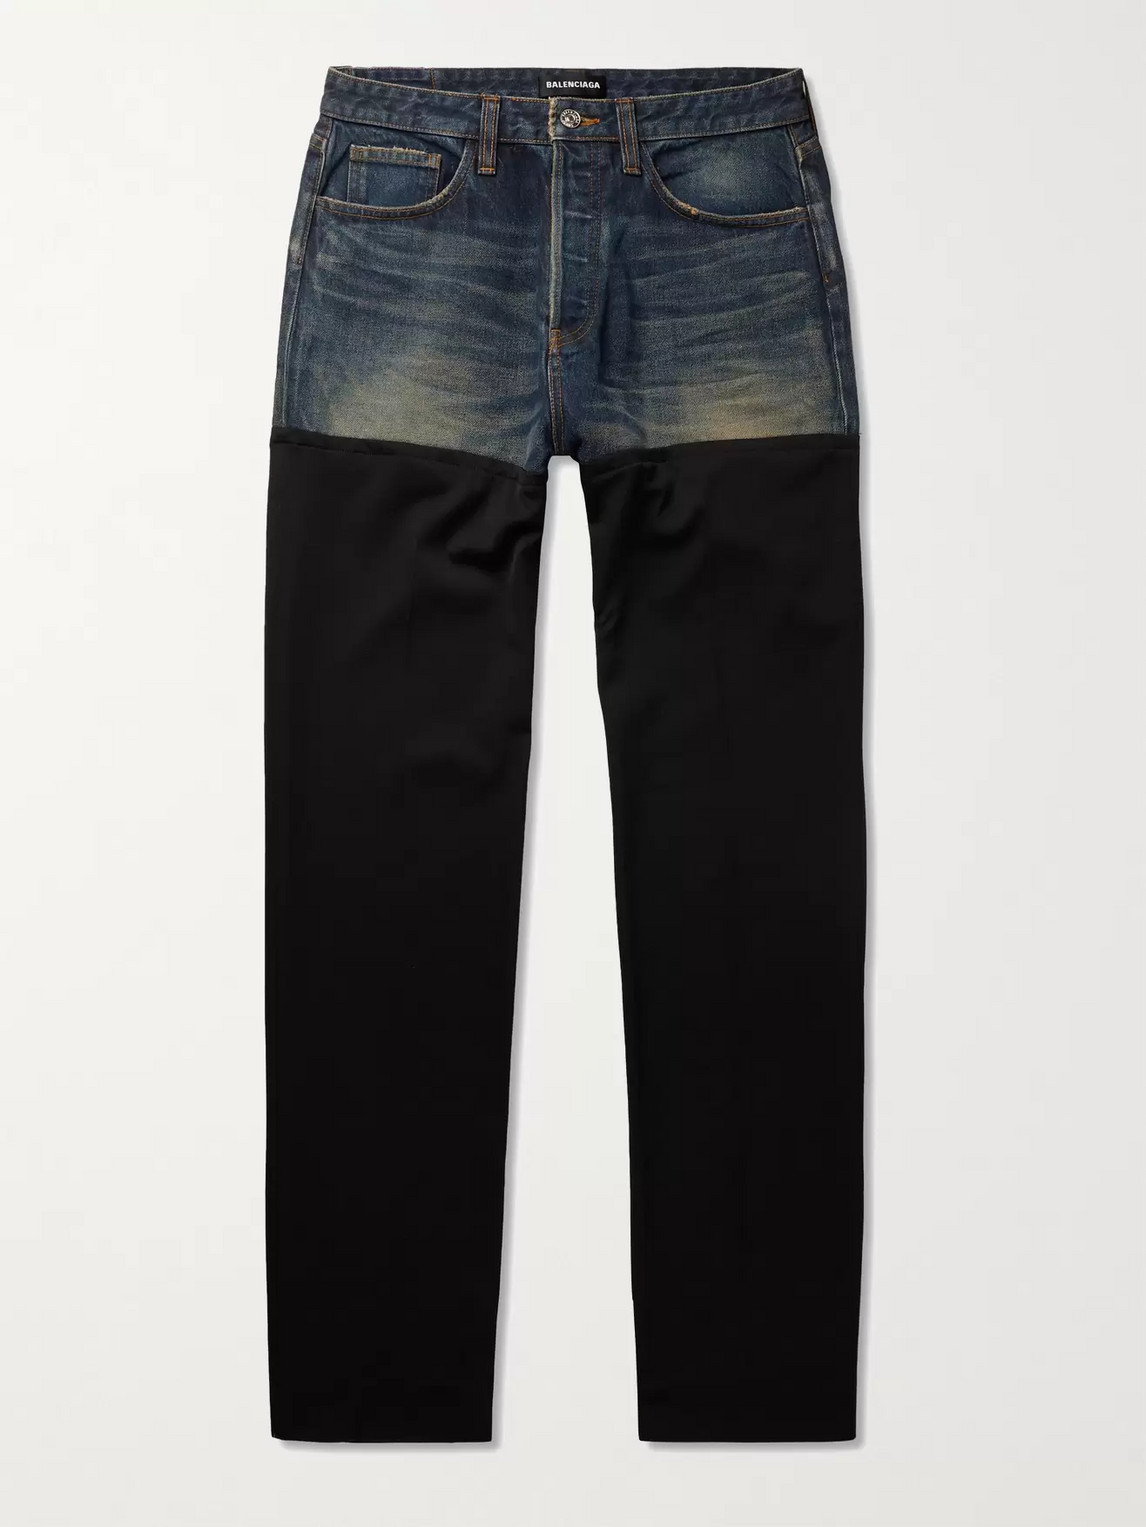 BALENCIAGA DISTRESSED PANELLED DENIM AND WOOL-TWILL JEANS